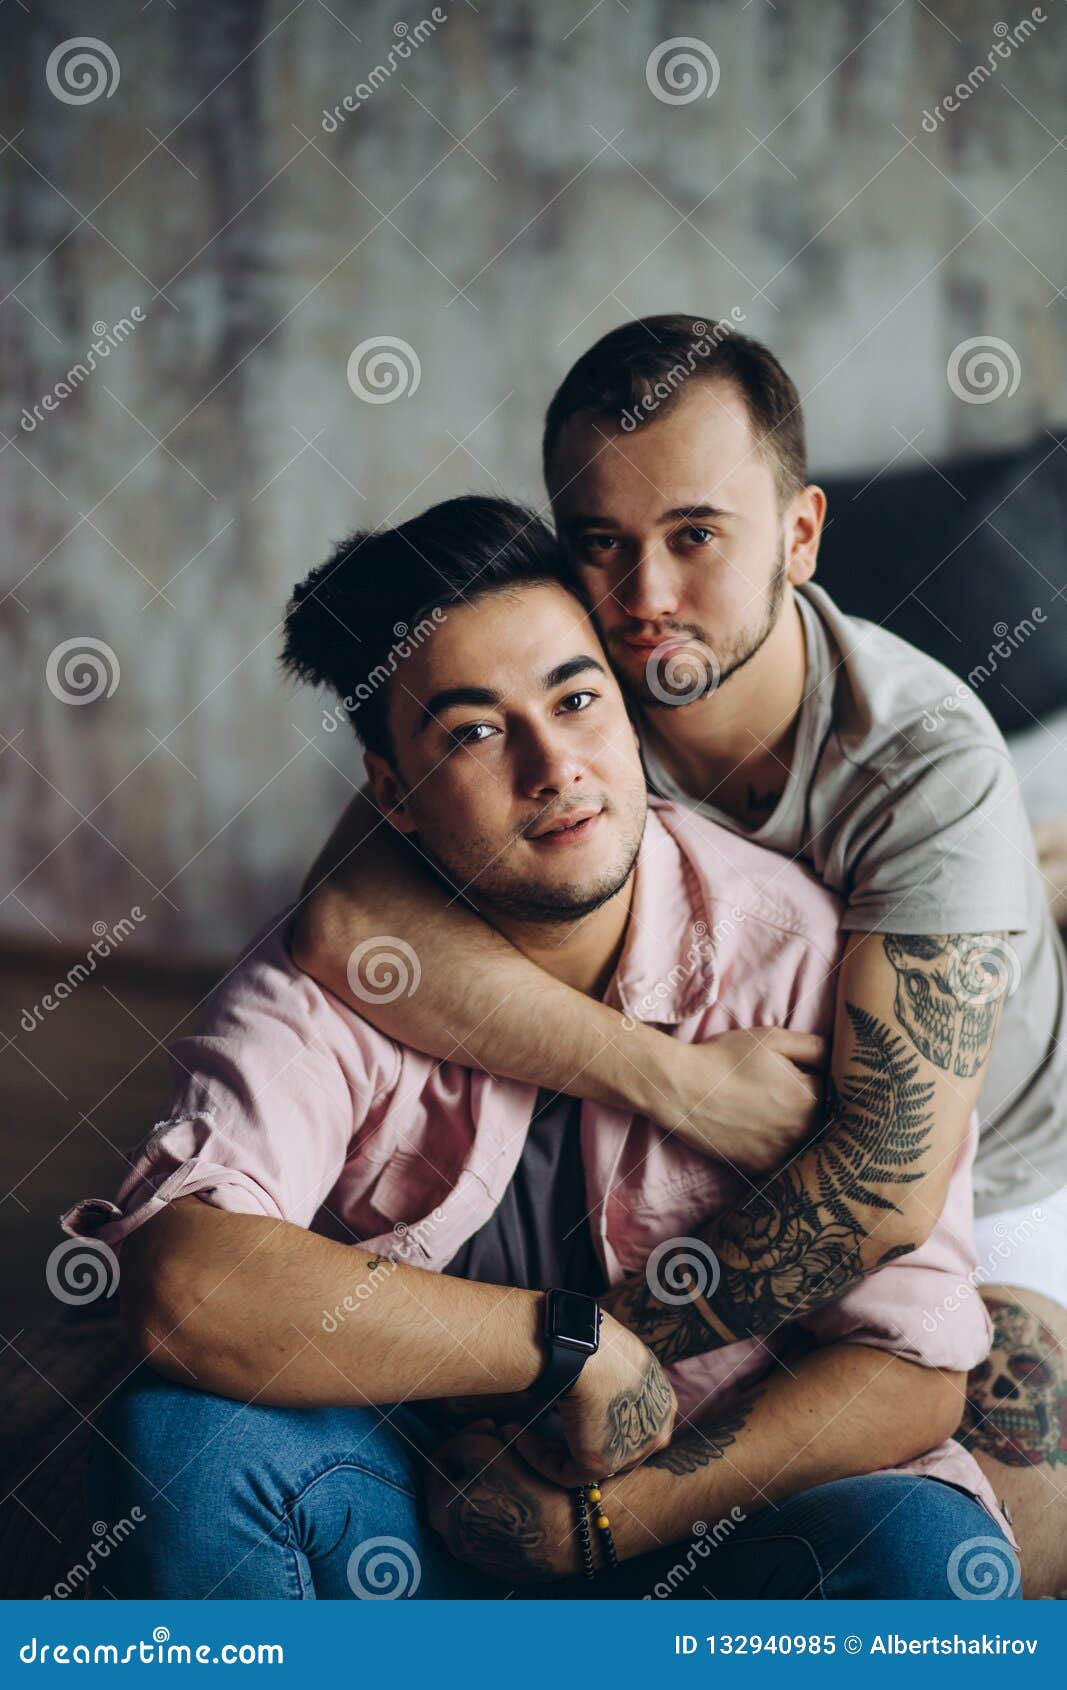 Best Place To Meet Gay Guys